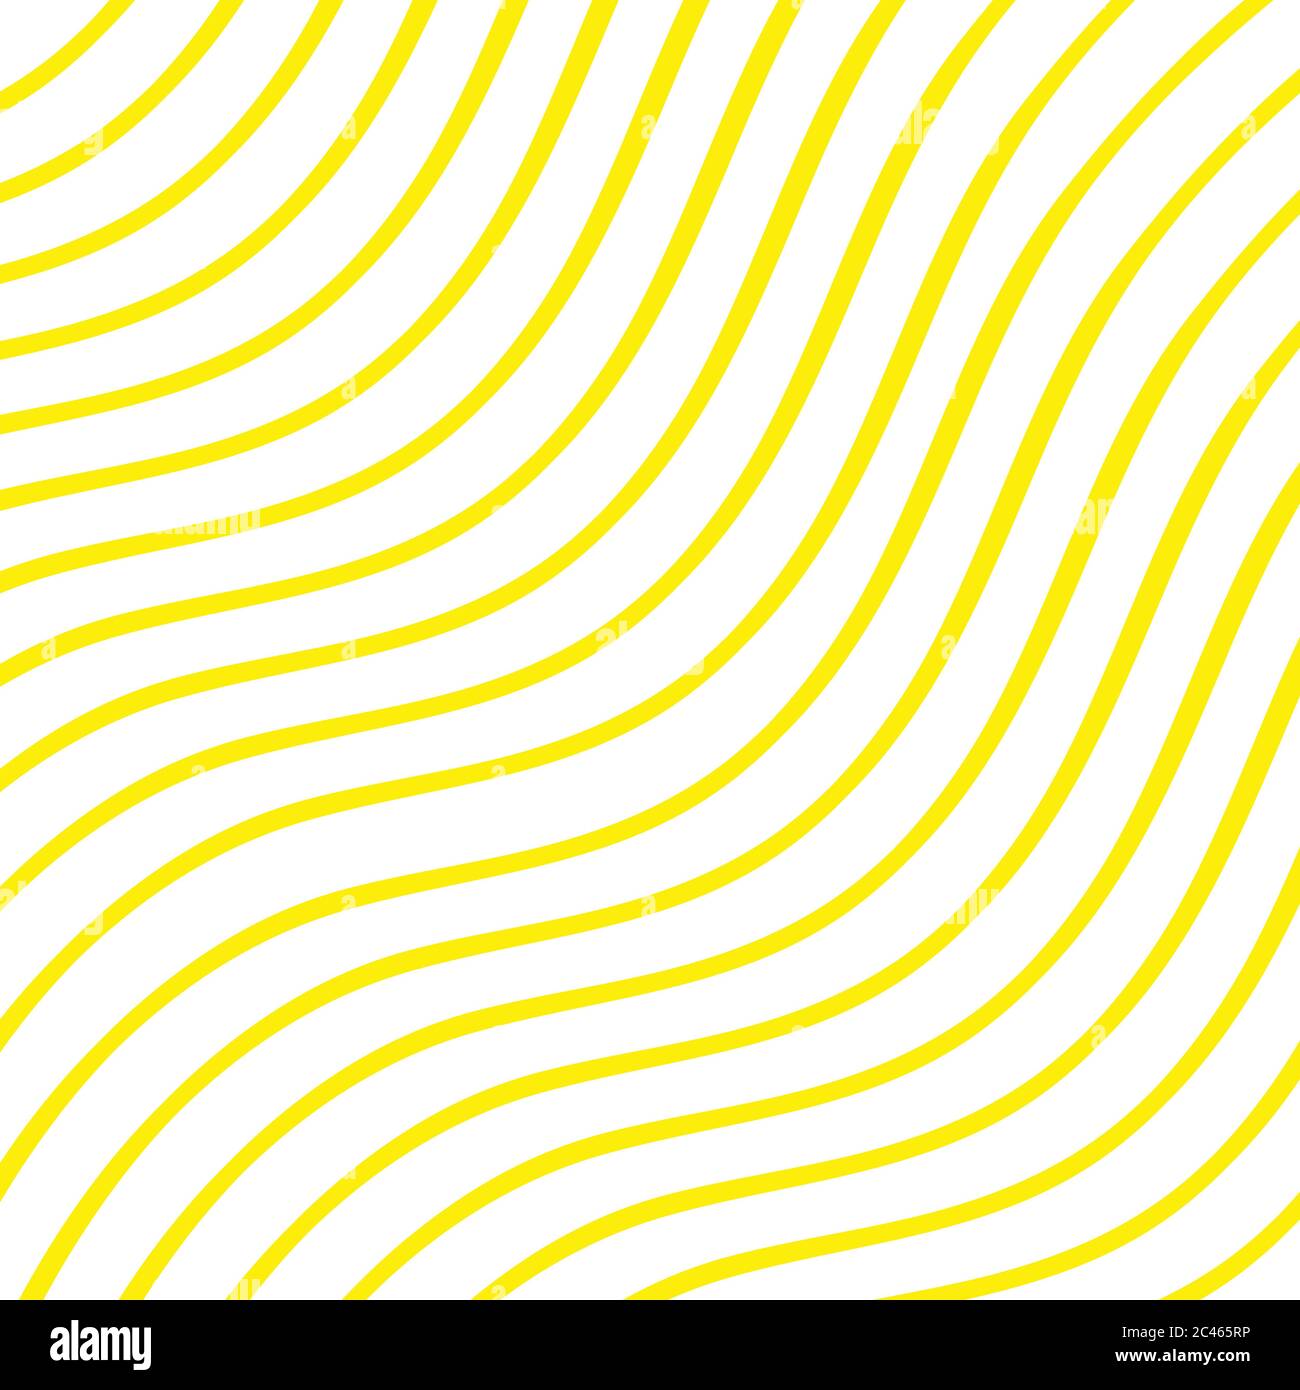 Yellow wave line abstract background. Abstract geometric diagonal stripe  pattern. Waves closeup banner template for design Stock Photo - Alamy